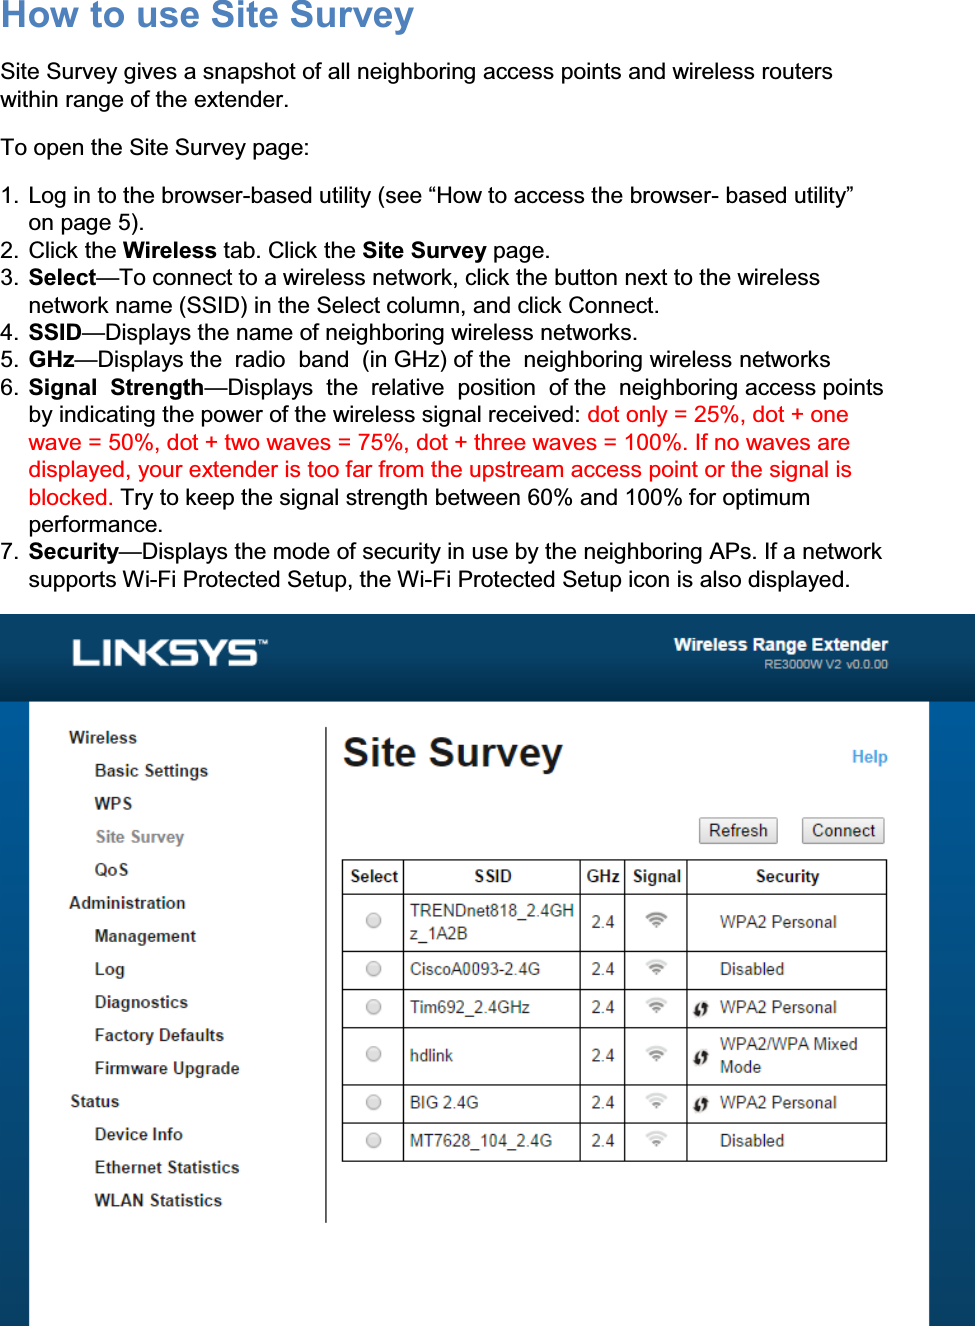 How to use Site Survey Site Survey gives a snapshot of all neighboring access points and wireless routers within range of the extender. To open the Site Survey page: 1. Log in to the browser-EDVHGXWLOLW\VHH³+RZWRDFFHVVWKHEURZVHU- EDVHGXWLOLW\´on page 5). 2. Click the Wireless tab. Click the Site Survey page. 3. Select²To connect to a wireless network, click the button next to the wireless network name (SSID) in the Select column, and click Connect. 4. SSID²Displays the name of neighboring wireless networks. 5. GHz²Displays the  radio  band  (in GHz) of the  neighboring wireless networks 6. Signal  Strength²Displays  the  relative  position  of the  neighboring access points  by indicating the power of the wireless signal received: dot only = 25%, dot + one wave = 50%, dot + two waves = 75%, dot + three waves = 100%. If no waves are displayed, your extender is too far from the upstream access point or the signal is blocked. Try to keep the signal strength between 60% and 100% for optimum performance. 7. Security²Displays the mode of security in use by the neighboring APs. If a network supports Wi-Fi Protected Setup, the Wi-Fi Protected Setup icon is also displayed.  